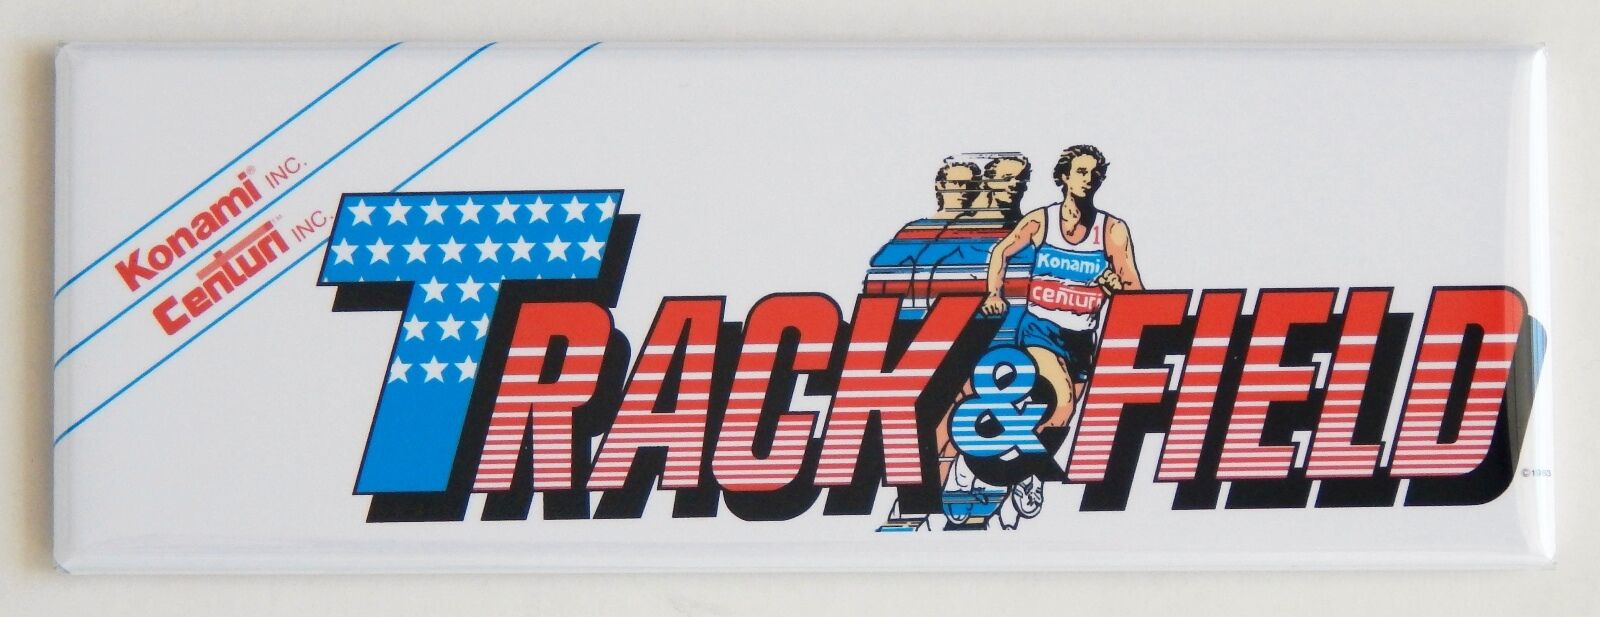 Track & Field Marquee FRIDGE MAGNET (1.5 x 4.5 inches) arcade video game